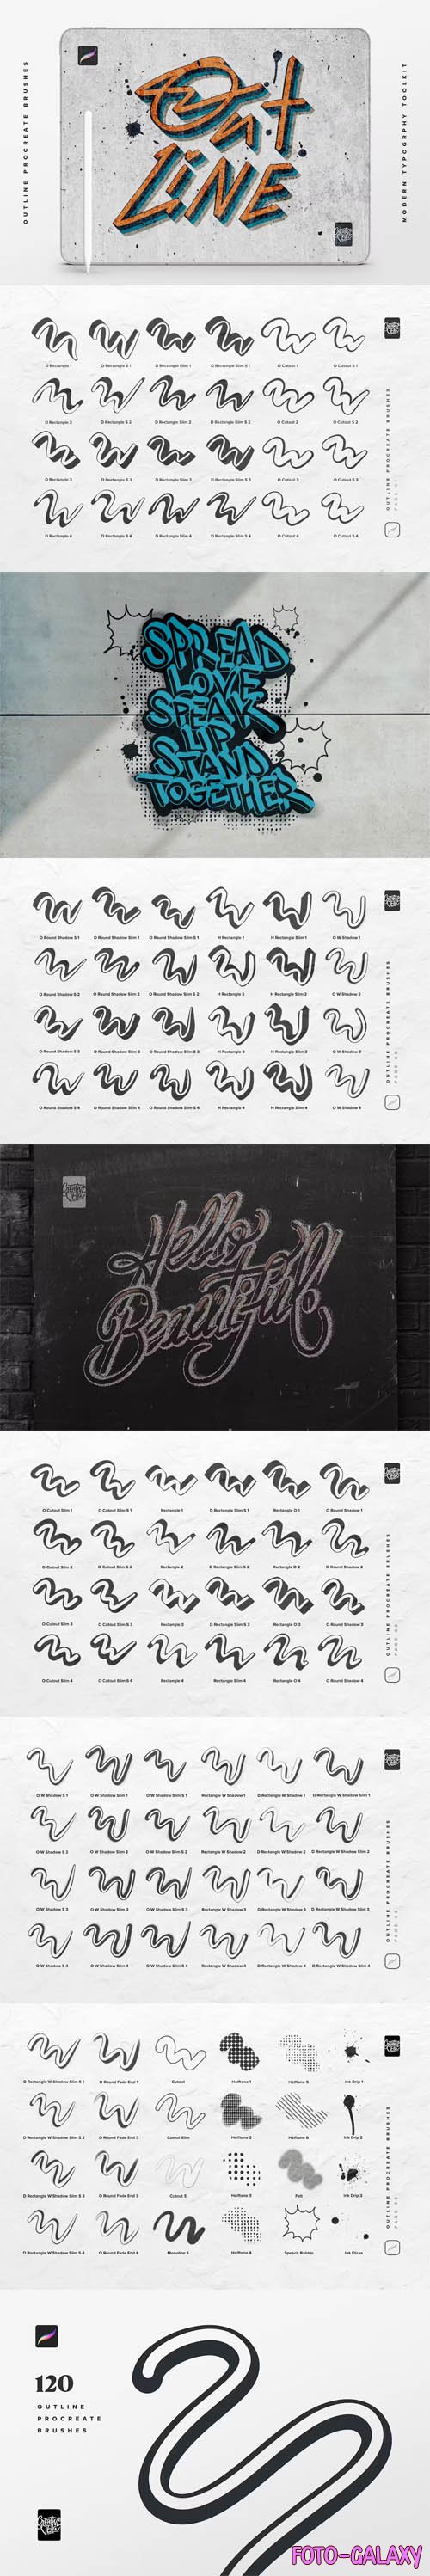 Outline Procreate Brushes - Modern Typography Toolkit